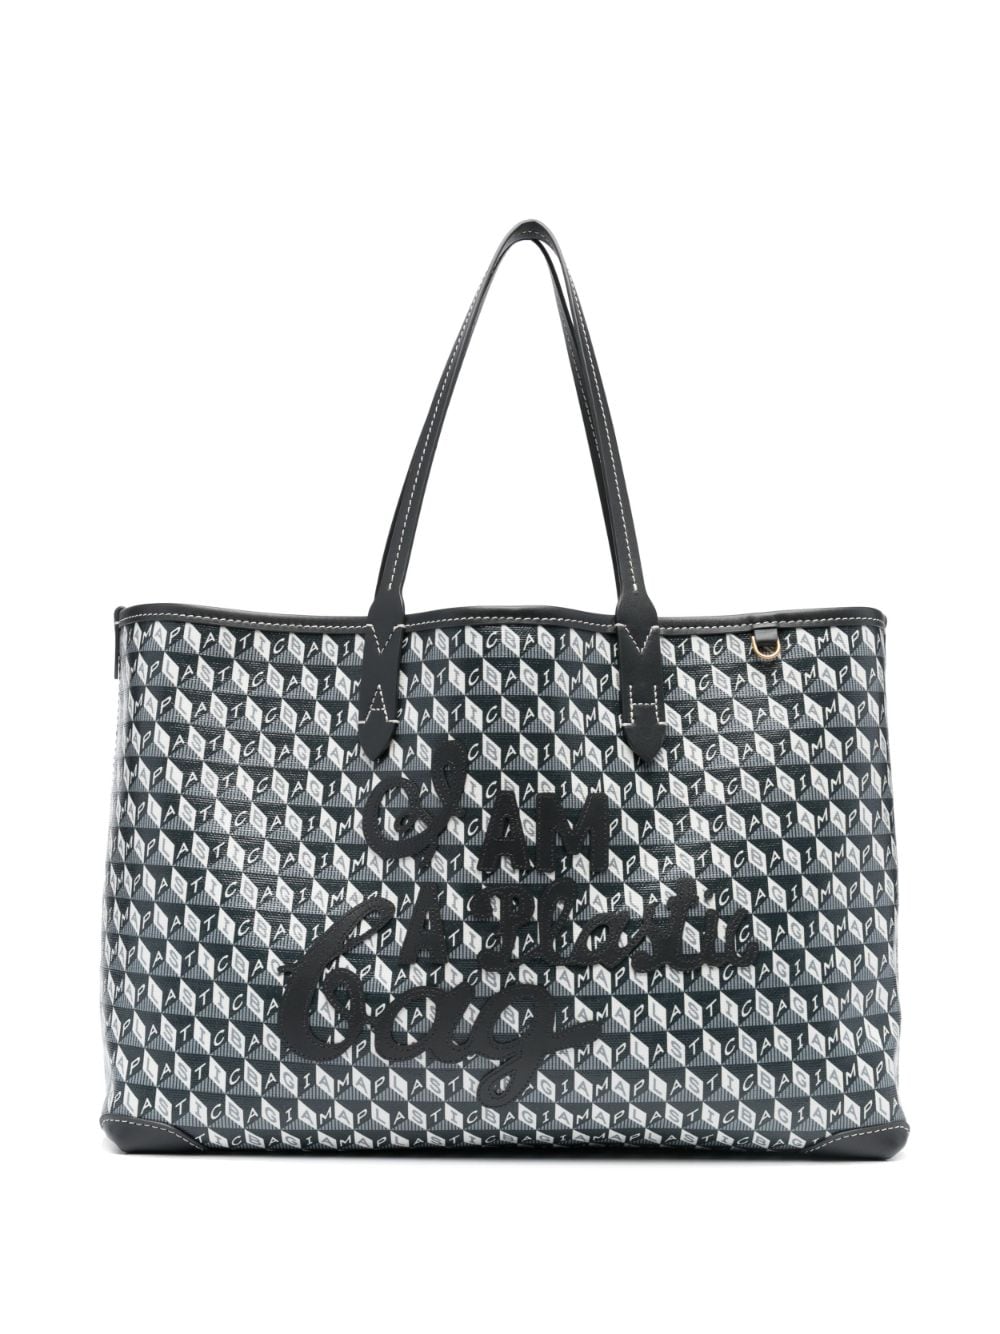 Buy Anya Hindmarch I Am A Motif Rainbow Tote Plastic Bag, White Color  Women